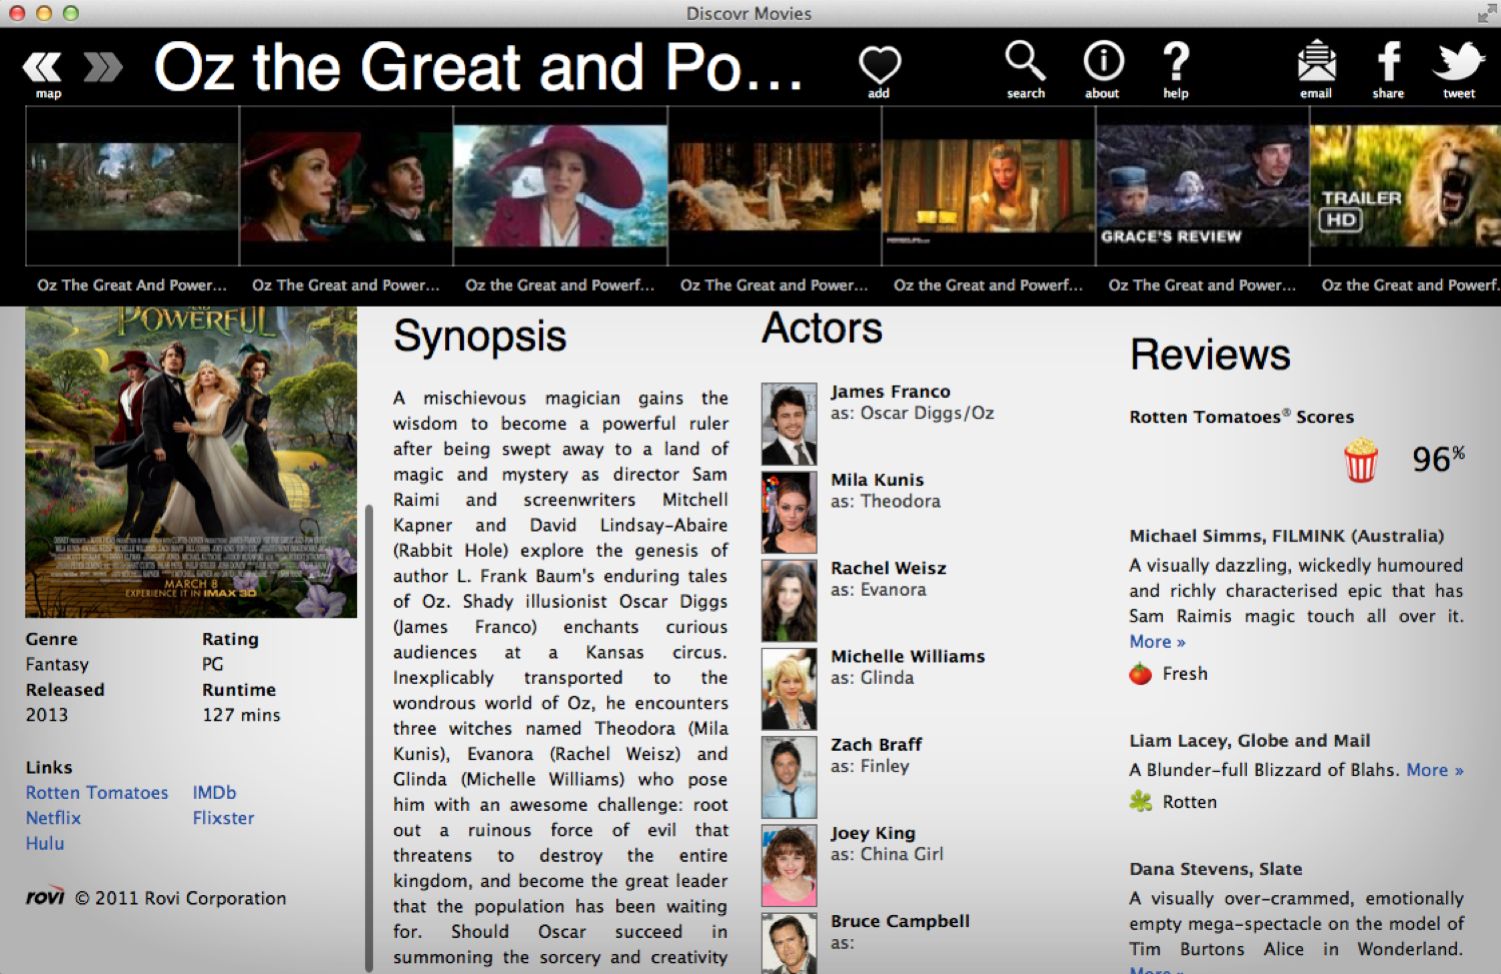 Discovr Movies - discover new movies 1.0 : Movie Details